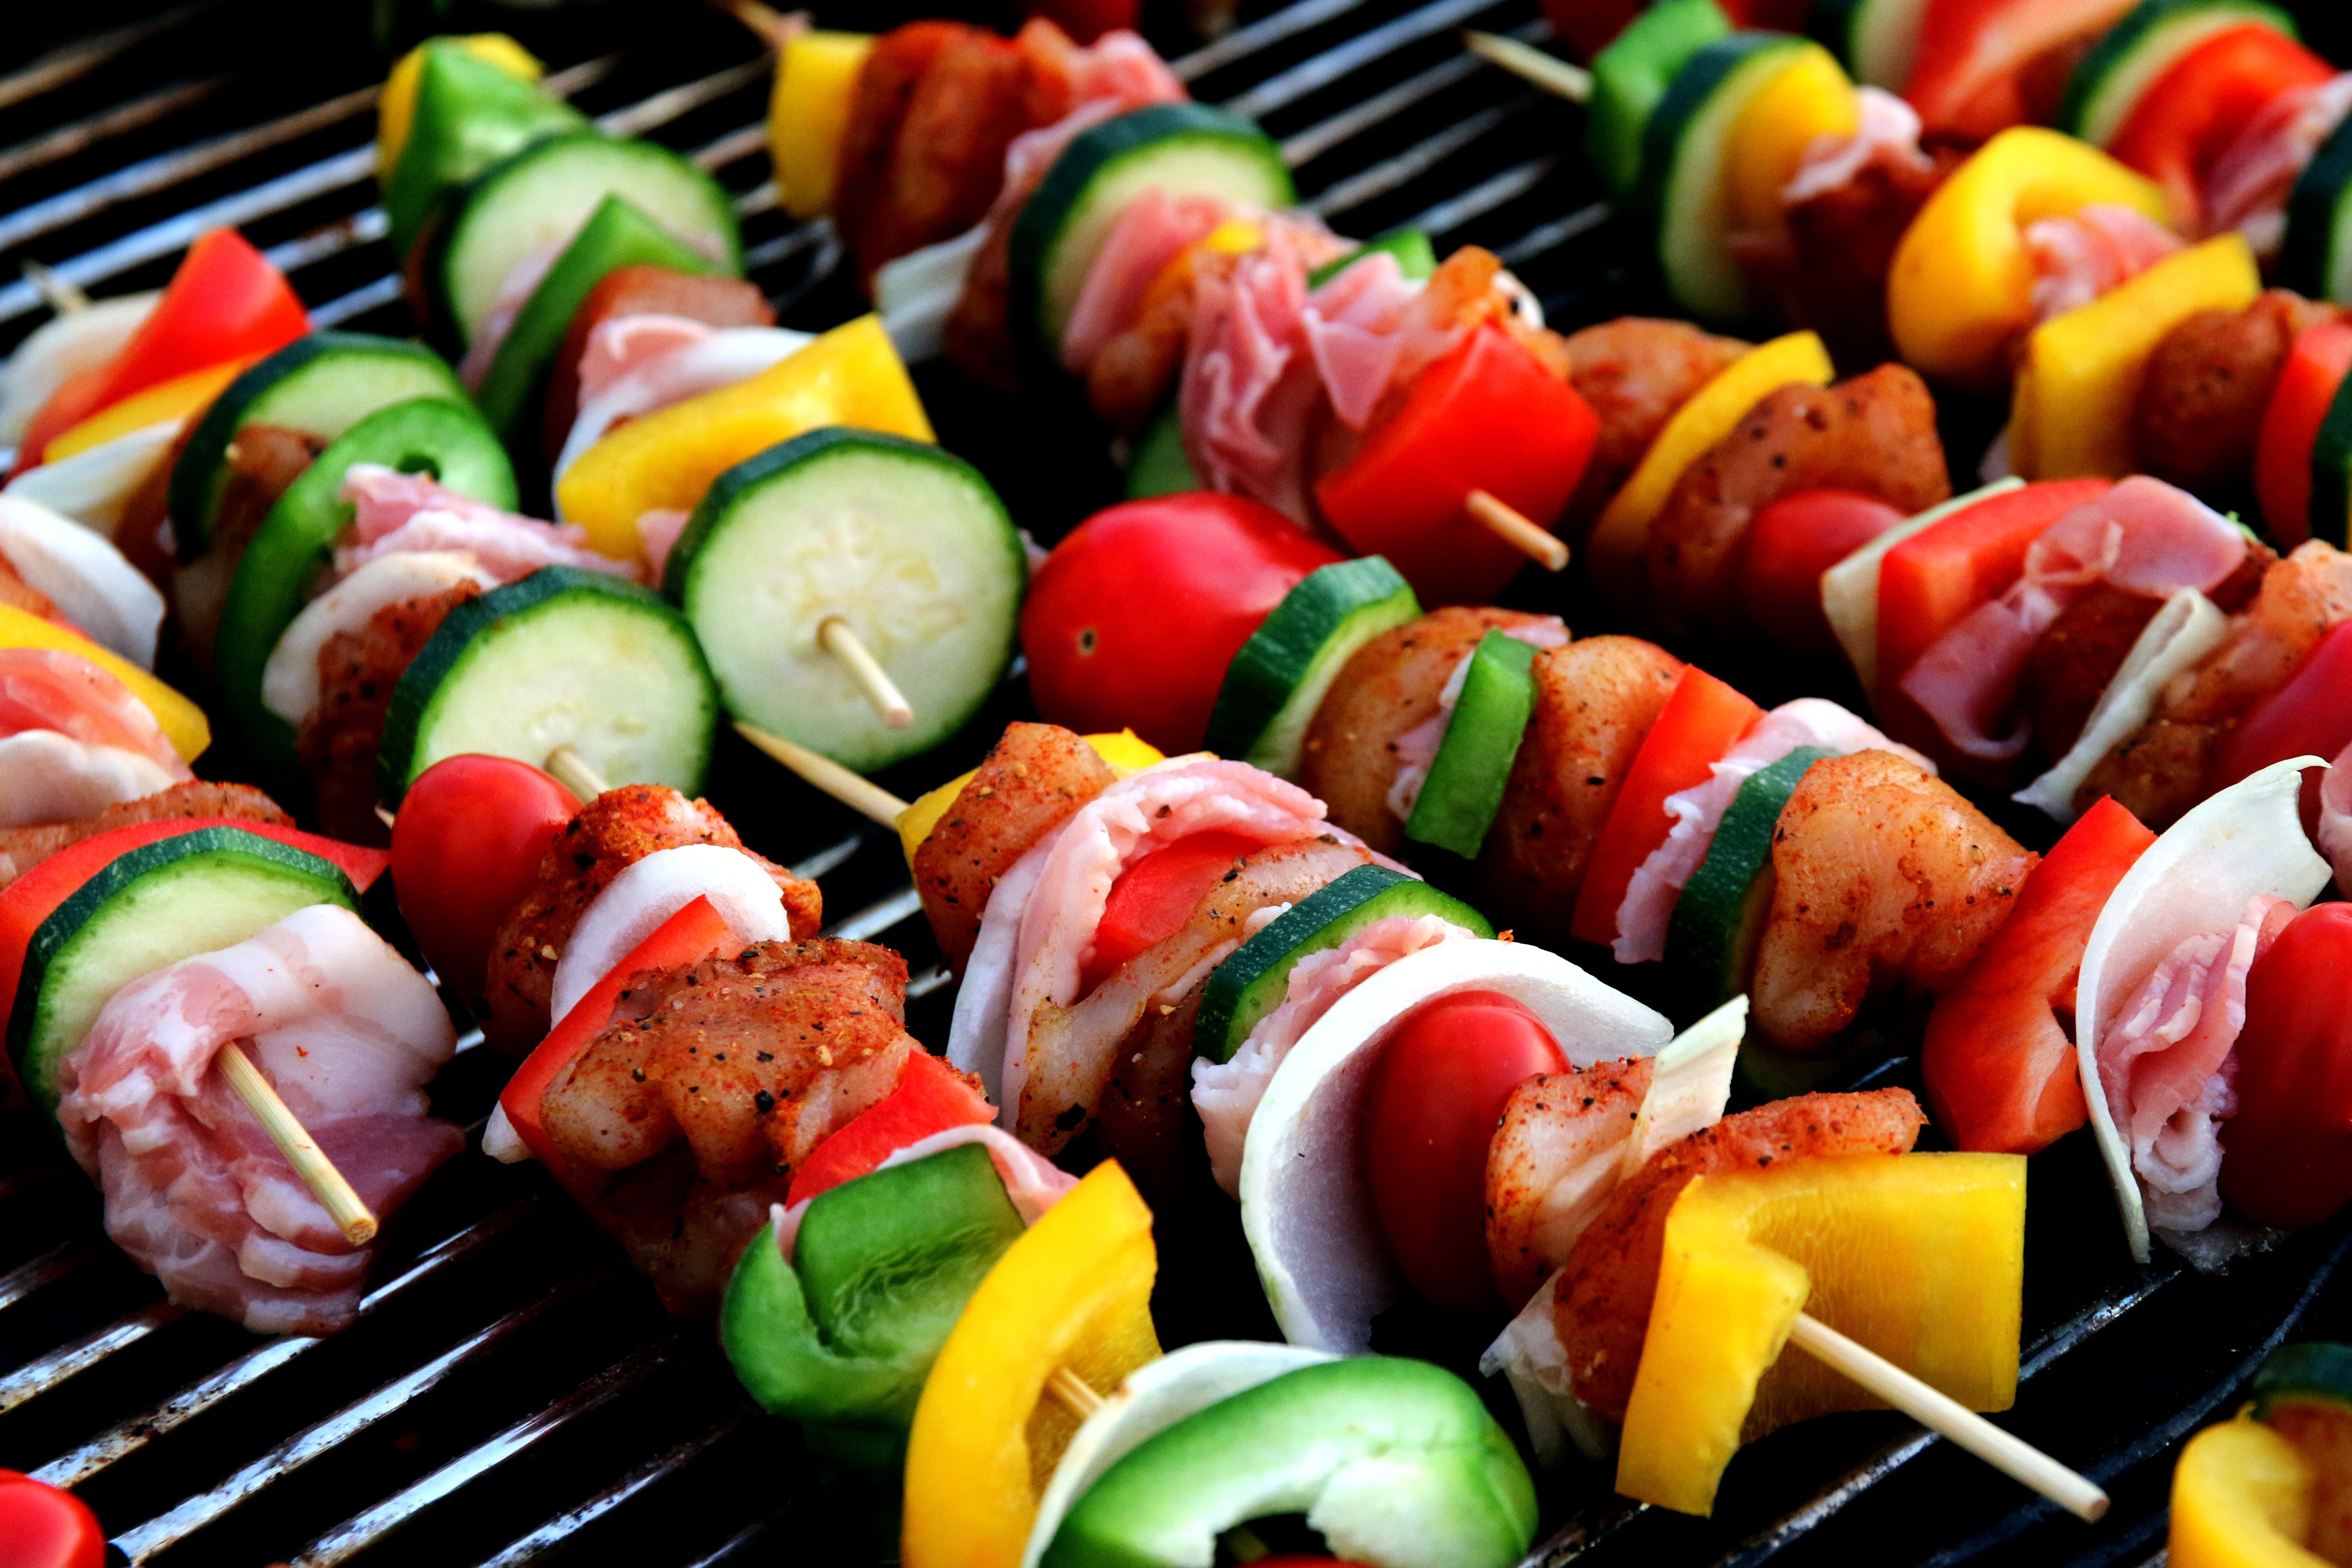 How To Have The Perfect Shish Kabob